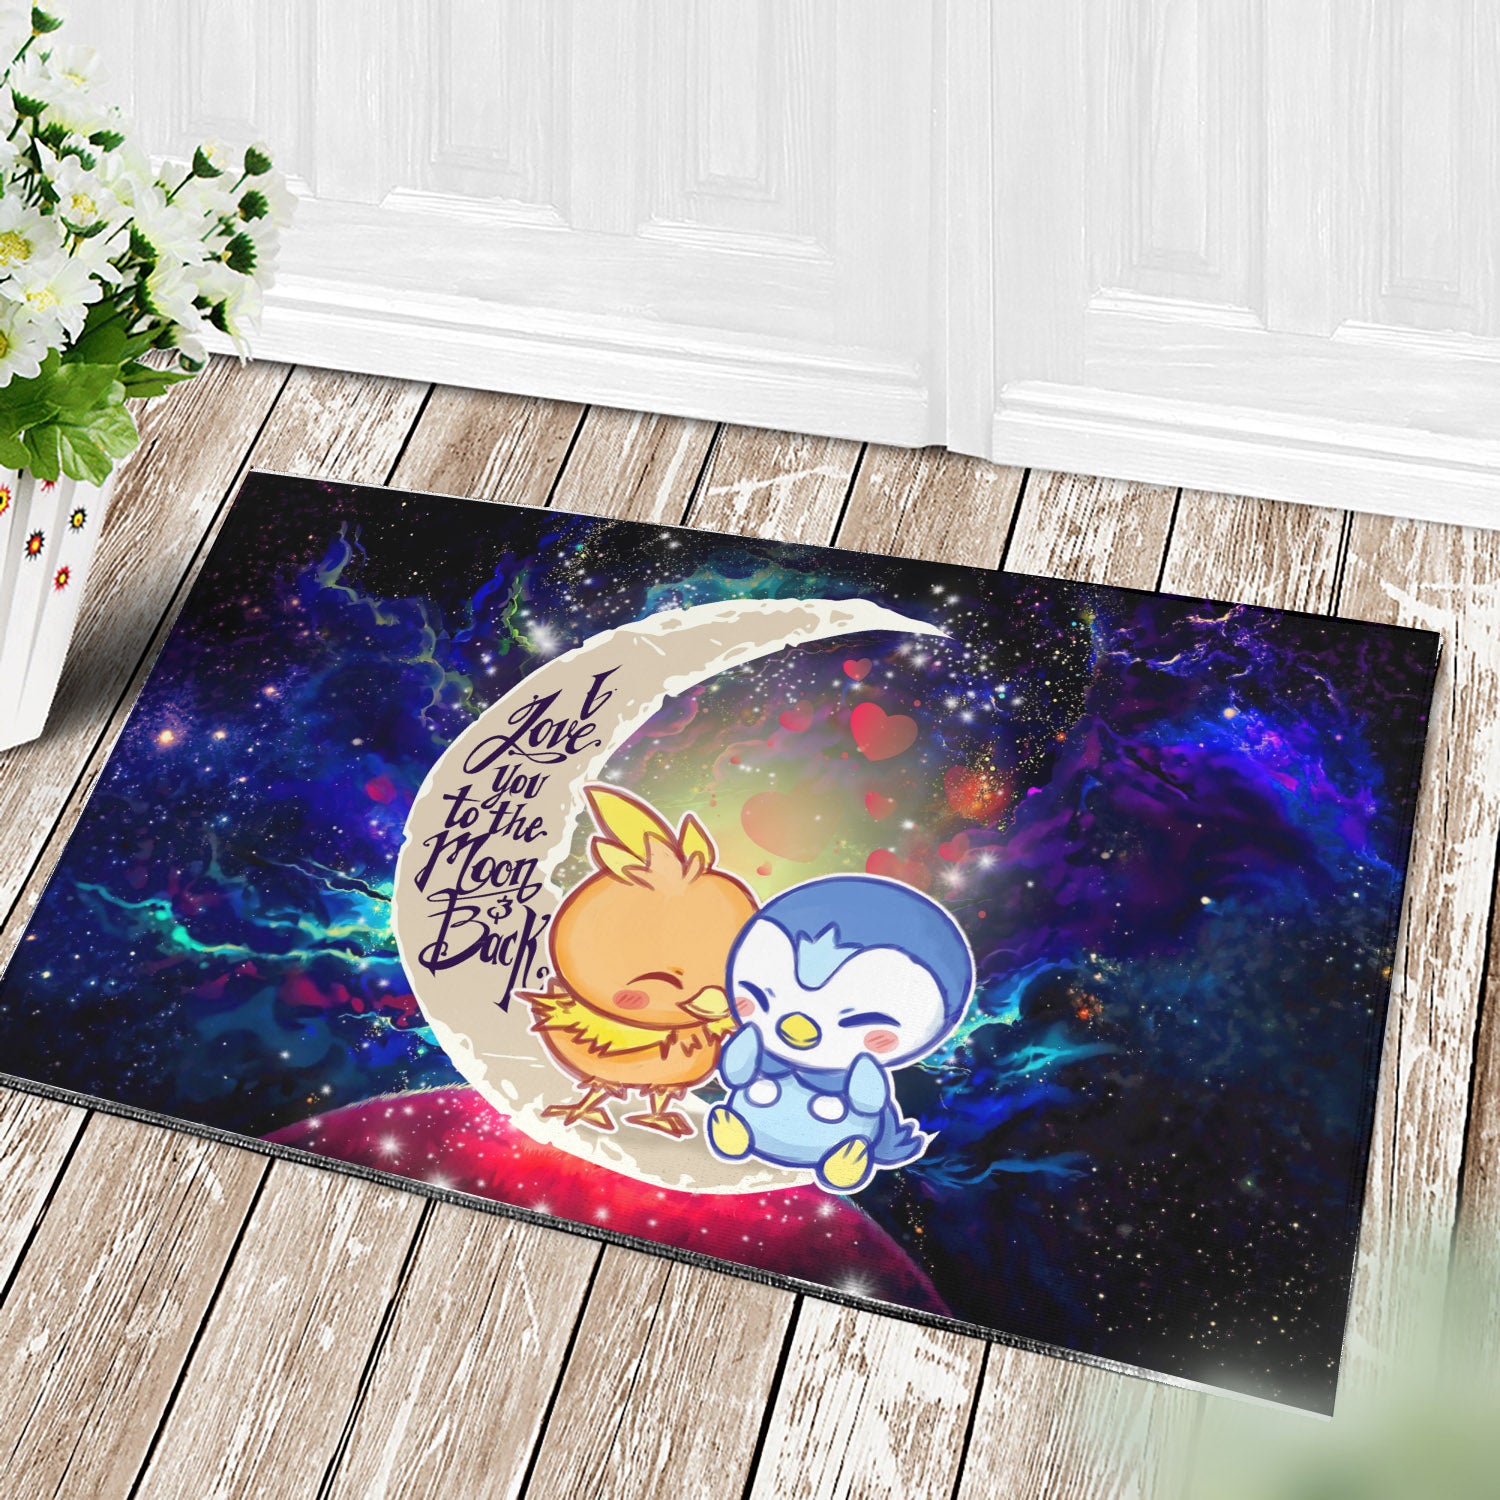 Pokemon Torchic Piplup Love You To The Moon Galaxy Doormat Home Decor Nearkii